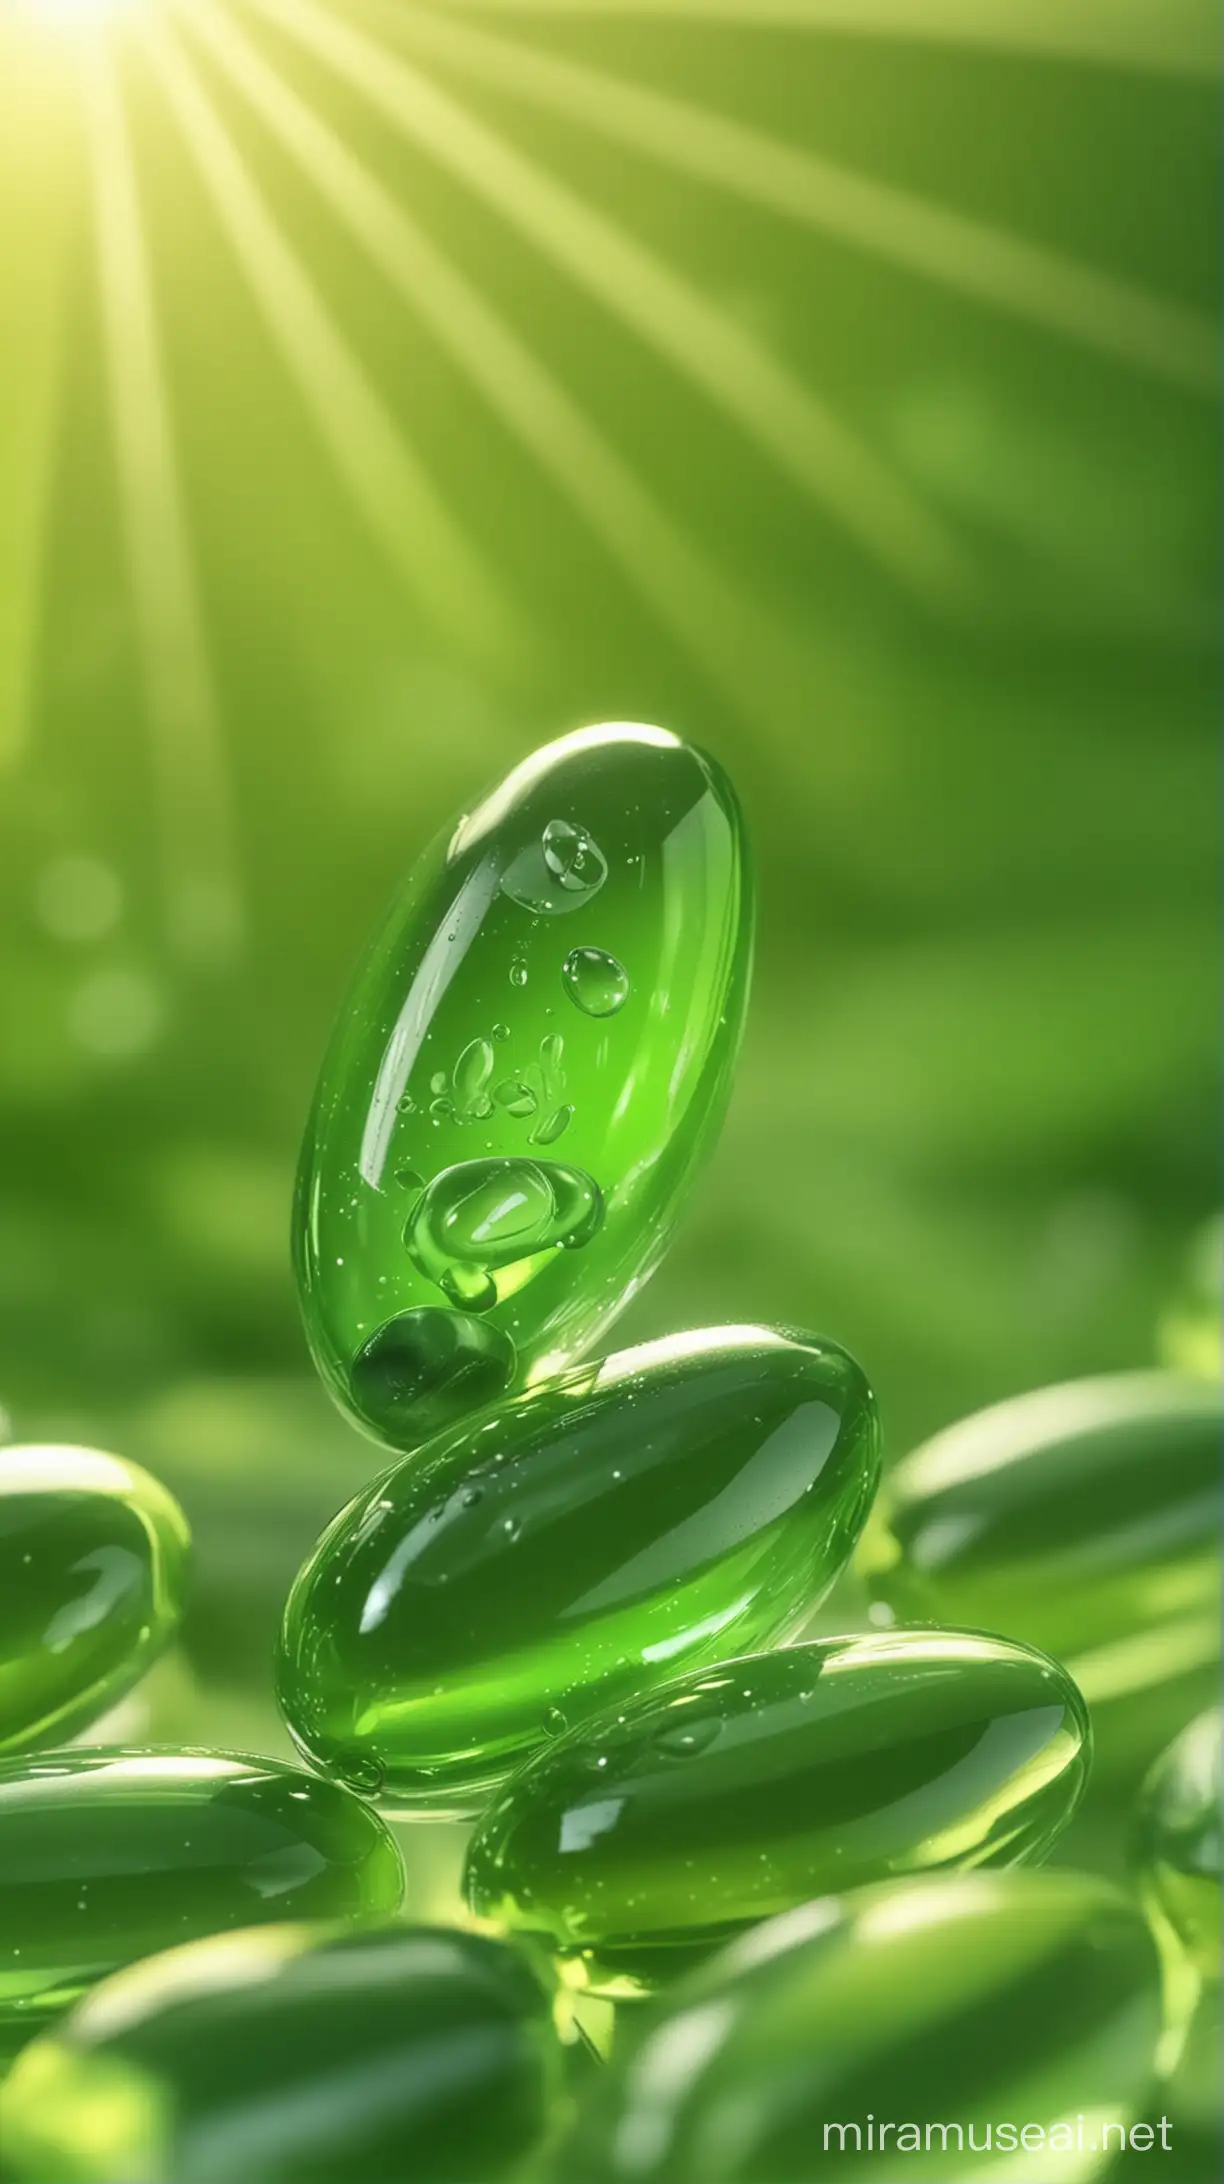 vitamin e capsule green color, natural background, sun light effect, 4k, HDR, morning time weather